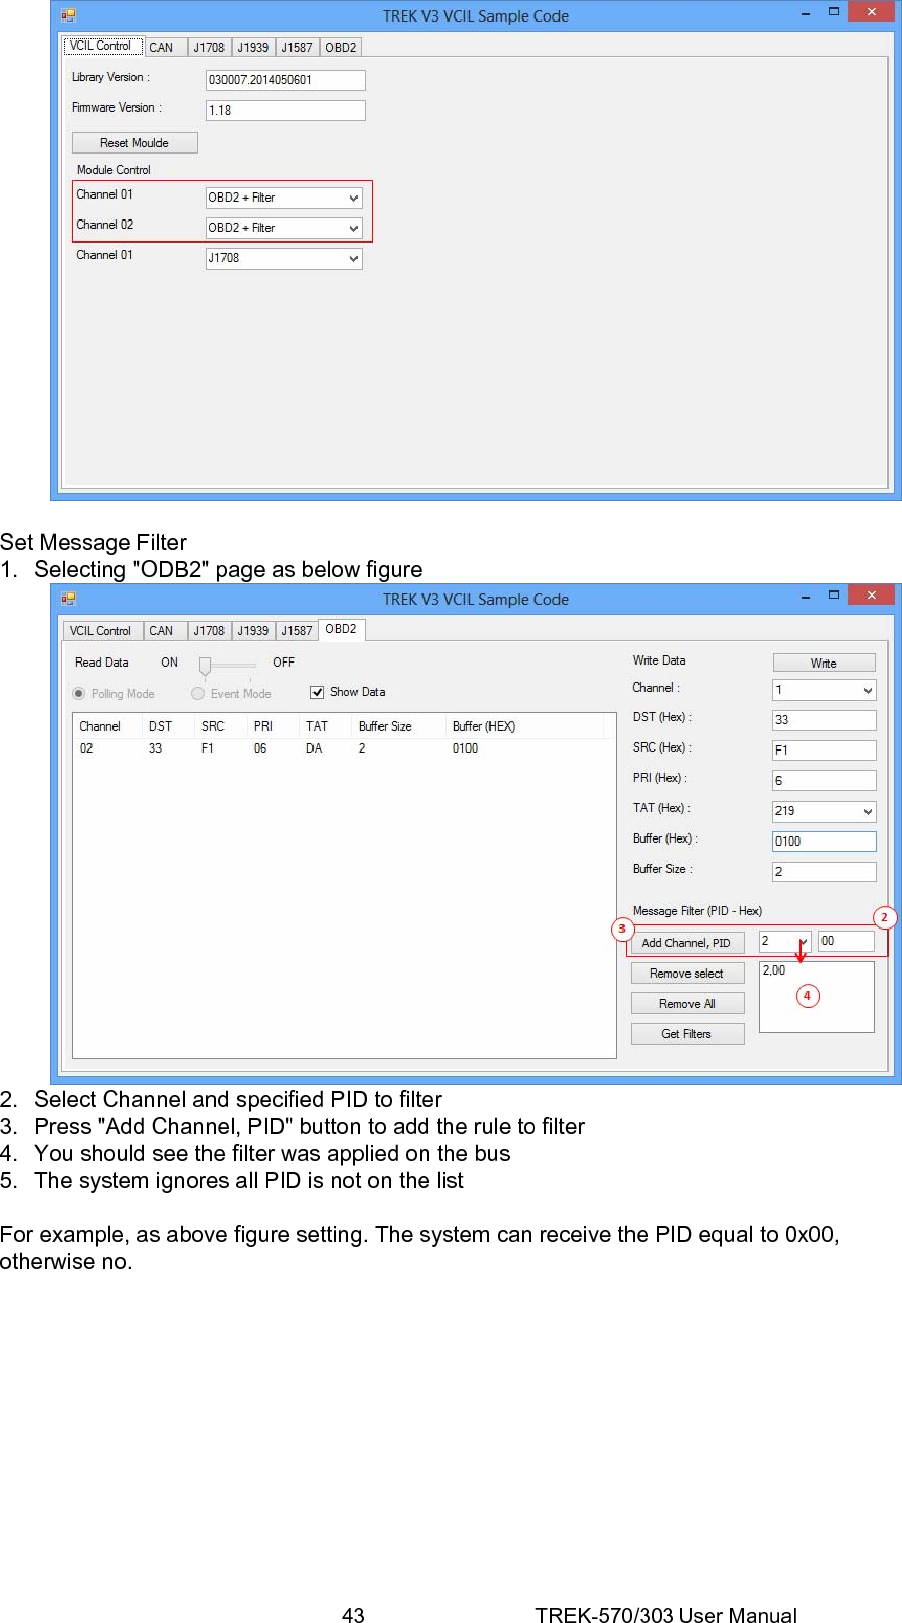 43 TREK-570/303 User Manual  Set Message Filter 1.  Selecting &quot;ODB2&quot; page as below figure  2.  Select Channel and specified PID to filter 3.  Press &quot;Add Channel, PID&quot; button to add the rule to filter 4.  You should see the filter was applied on the bus 5.  The system ignores all PID is not on the list  For example, as above figure setting. The system can receive the PID equal to 0x00, otherwise no.             